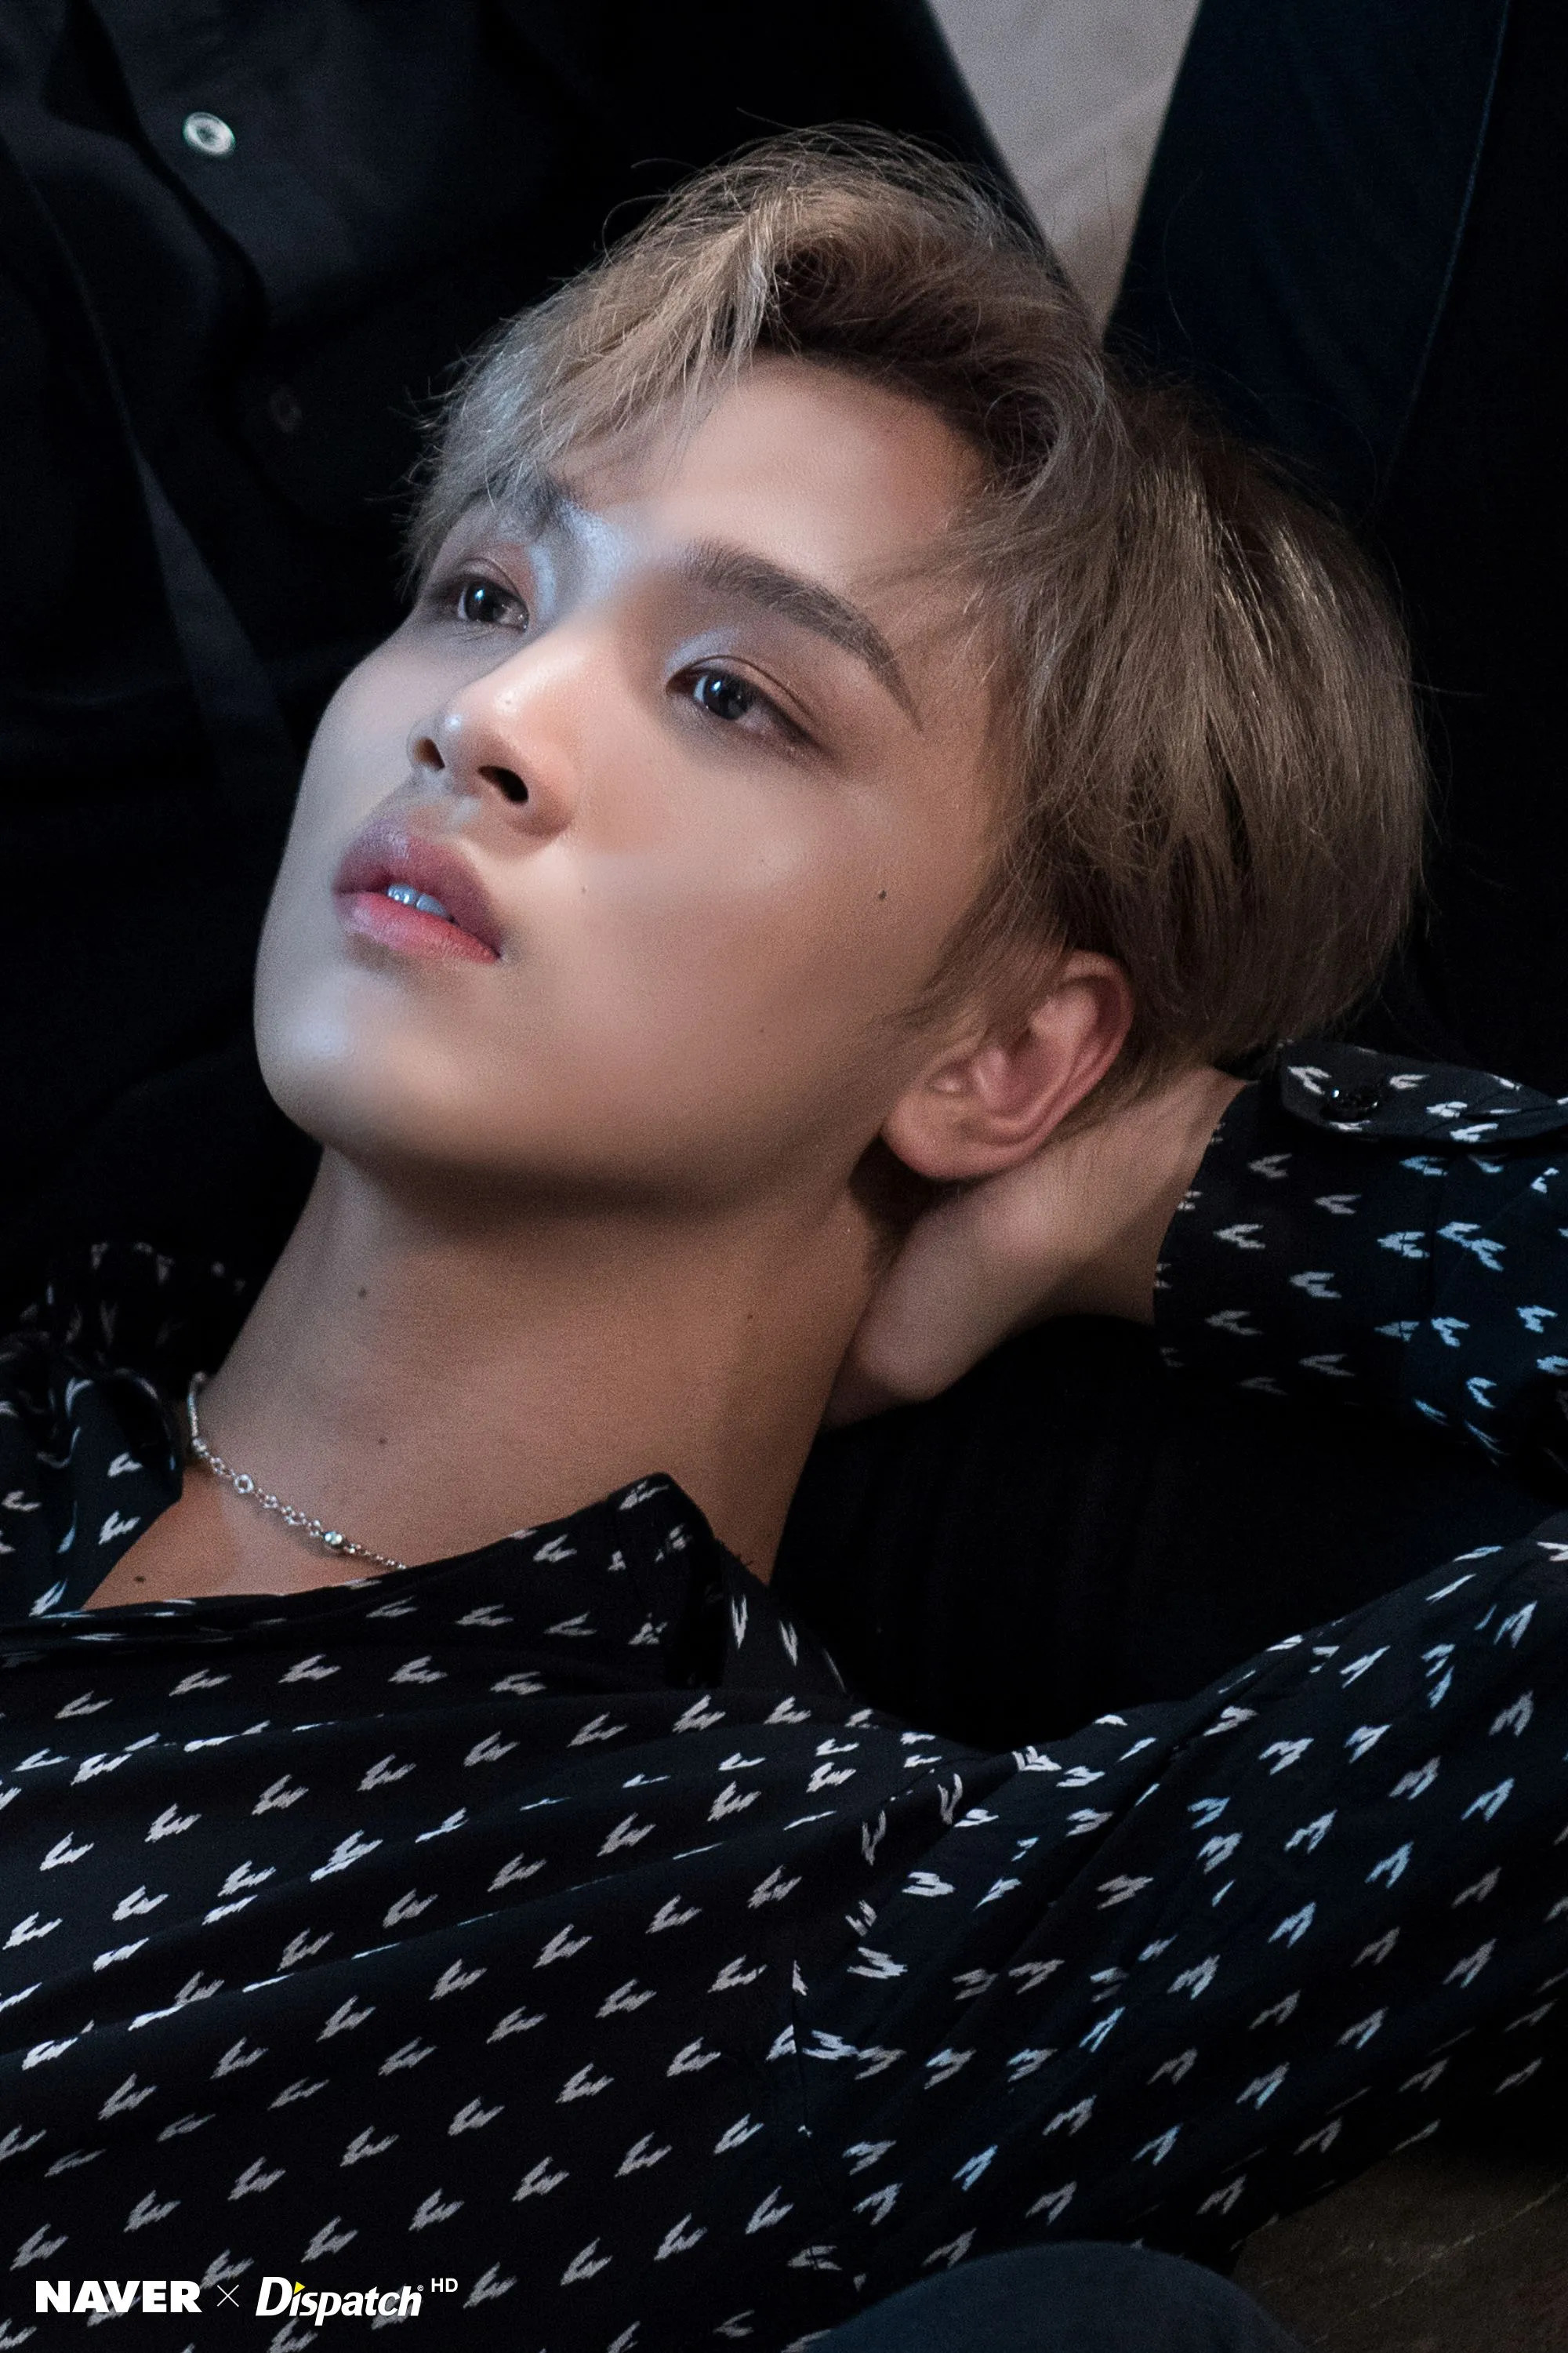 Haechan 'NCT 127 City of Angels' Behind the Scenes Photoshoot by Naver x  Dispatch | Kpopping